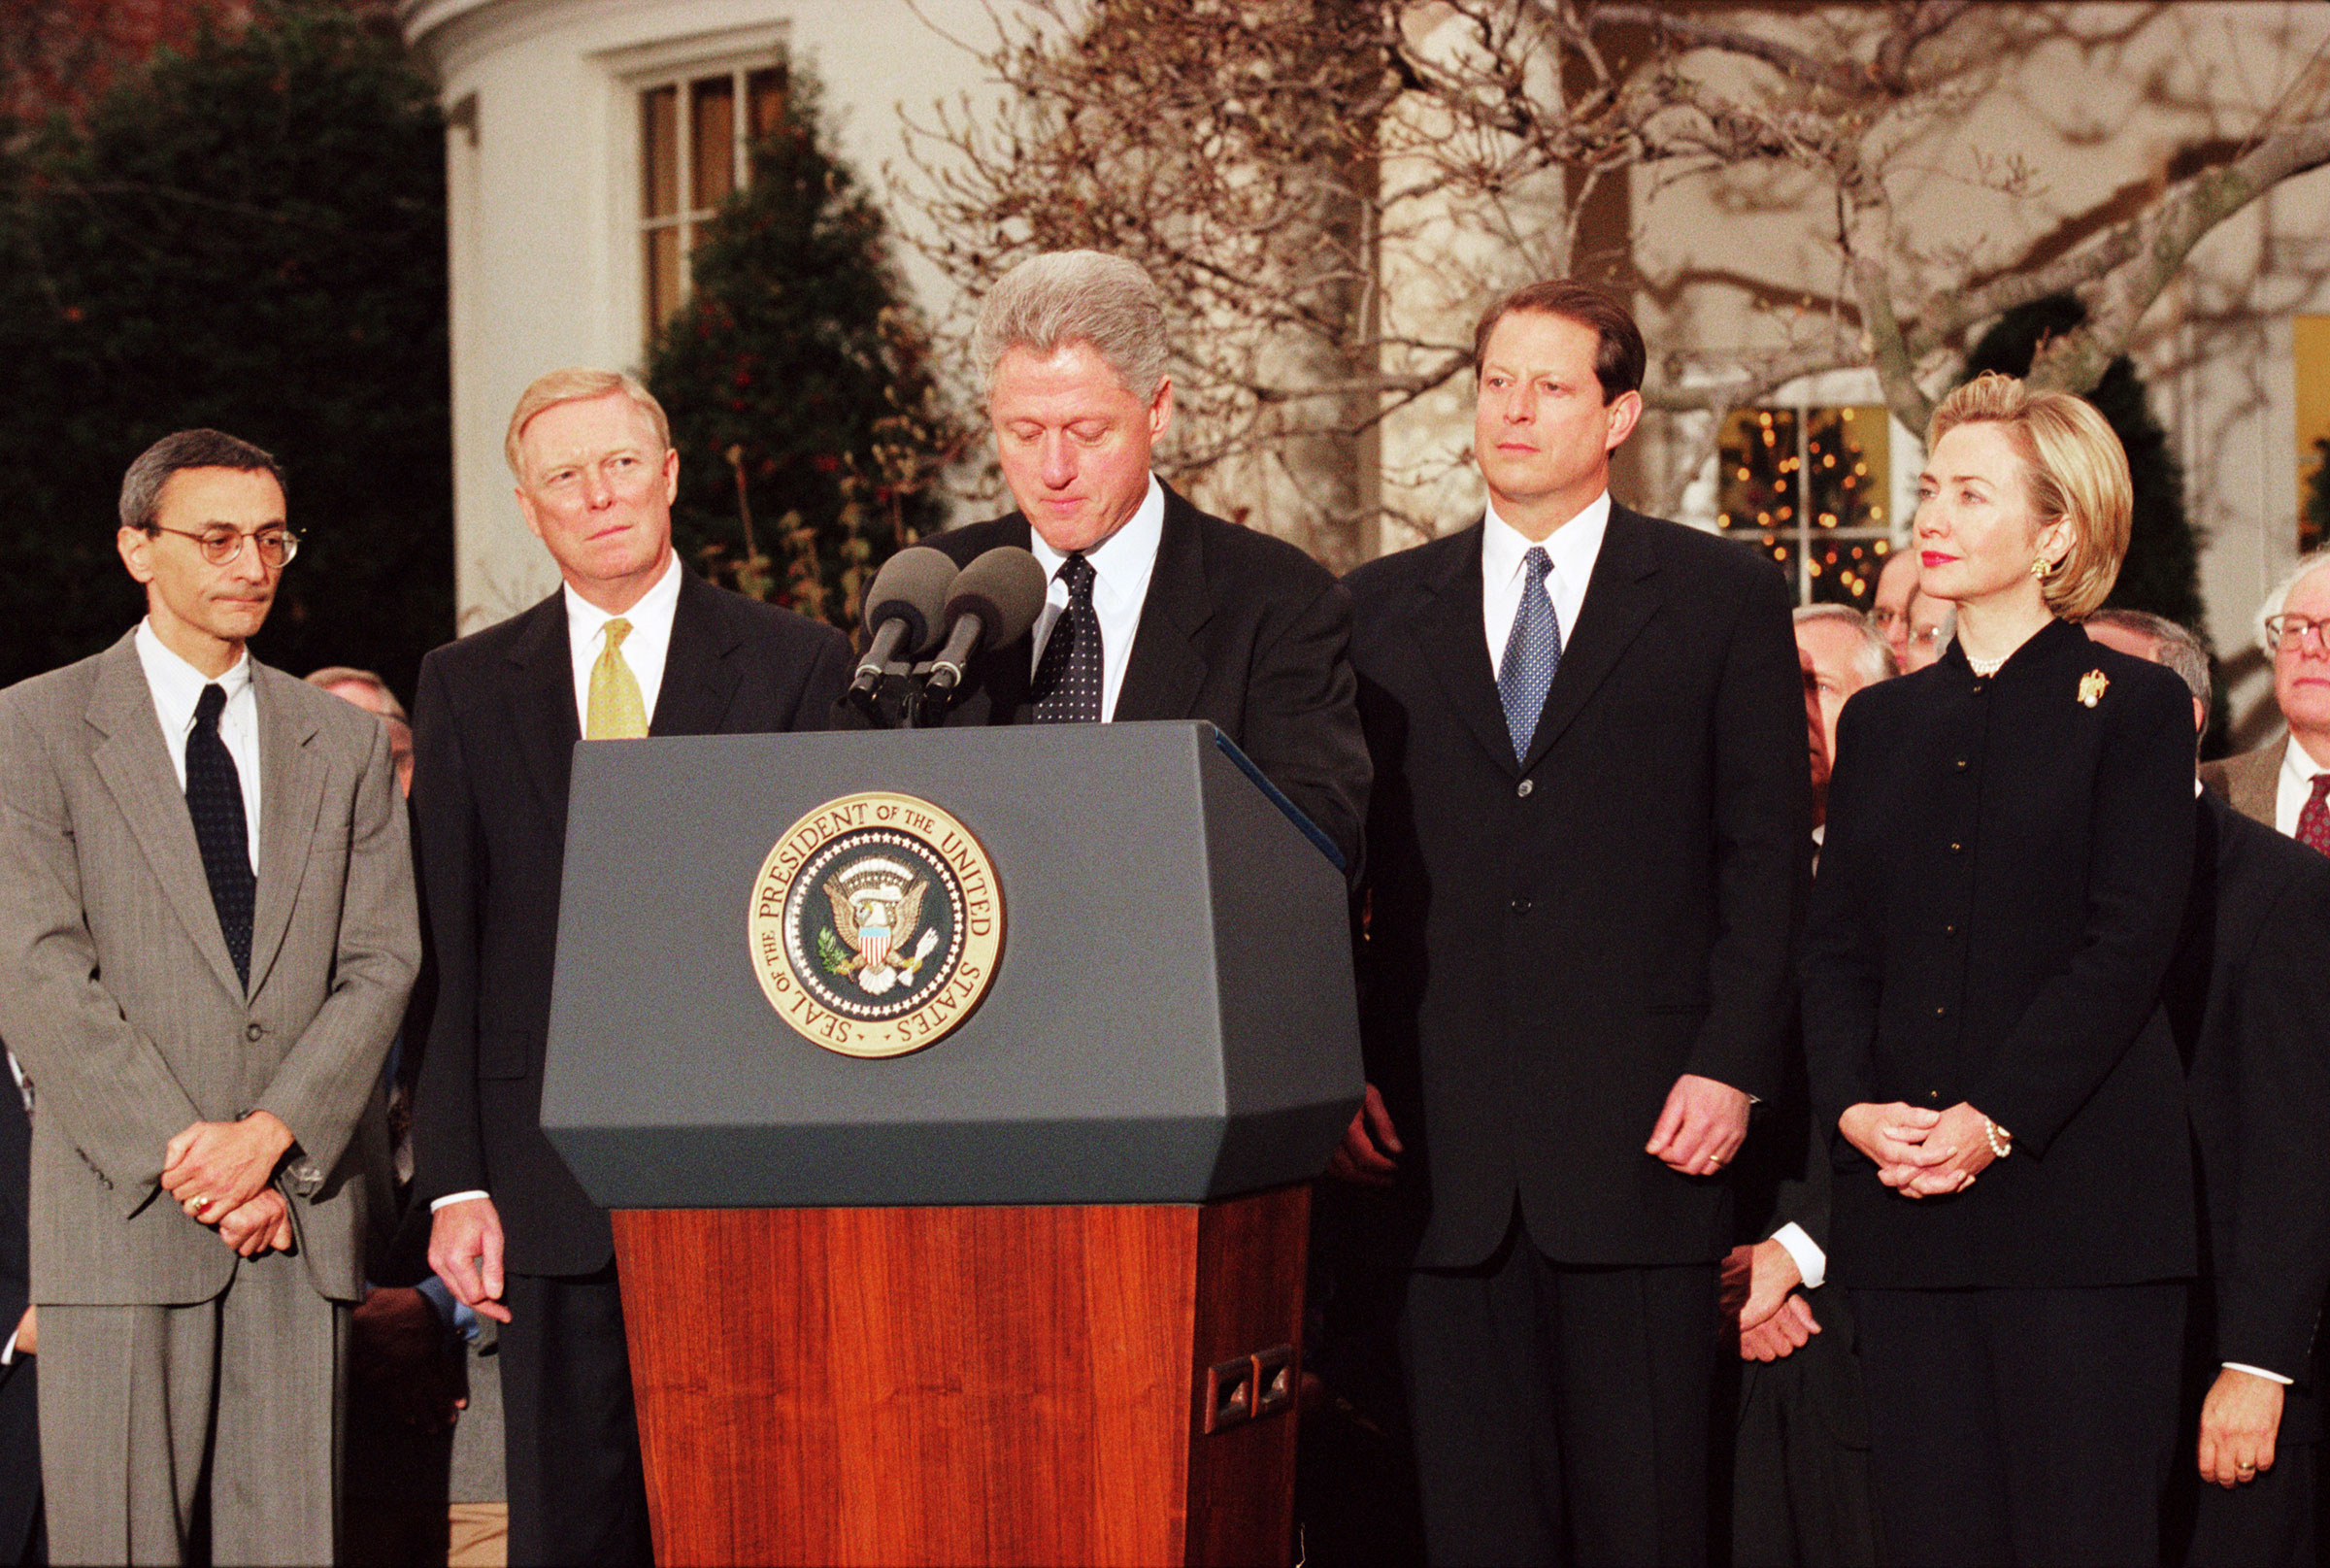 President Bill Clinton reacts to being impeached by the House of Representatives outside of the oval office in the White House Rose Garden, on Dec. 19, 1998. (David Hume Kennerly—Getty Images)